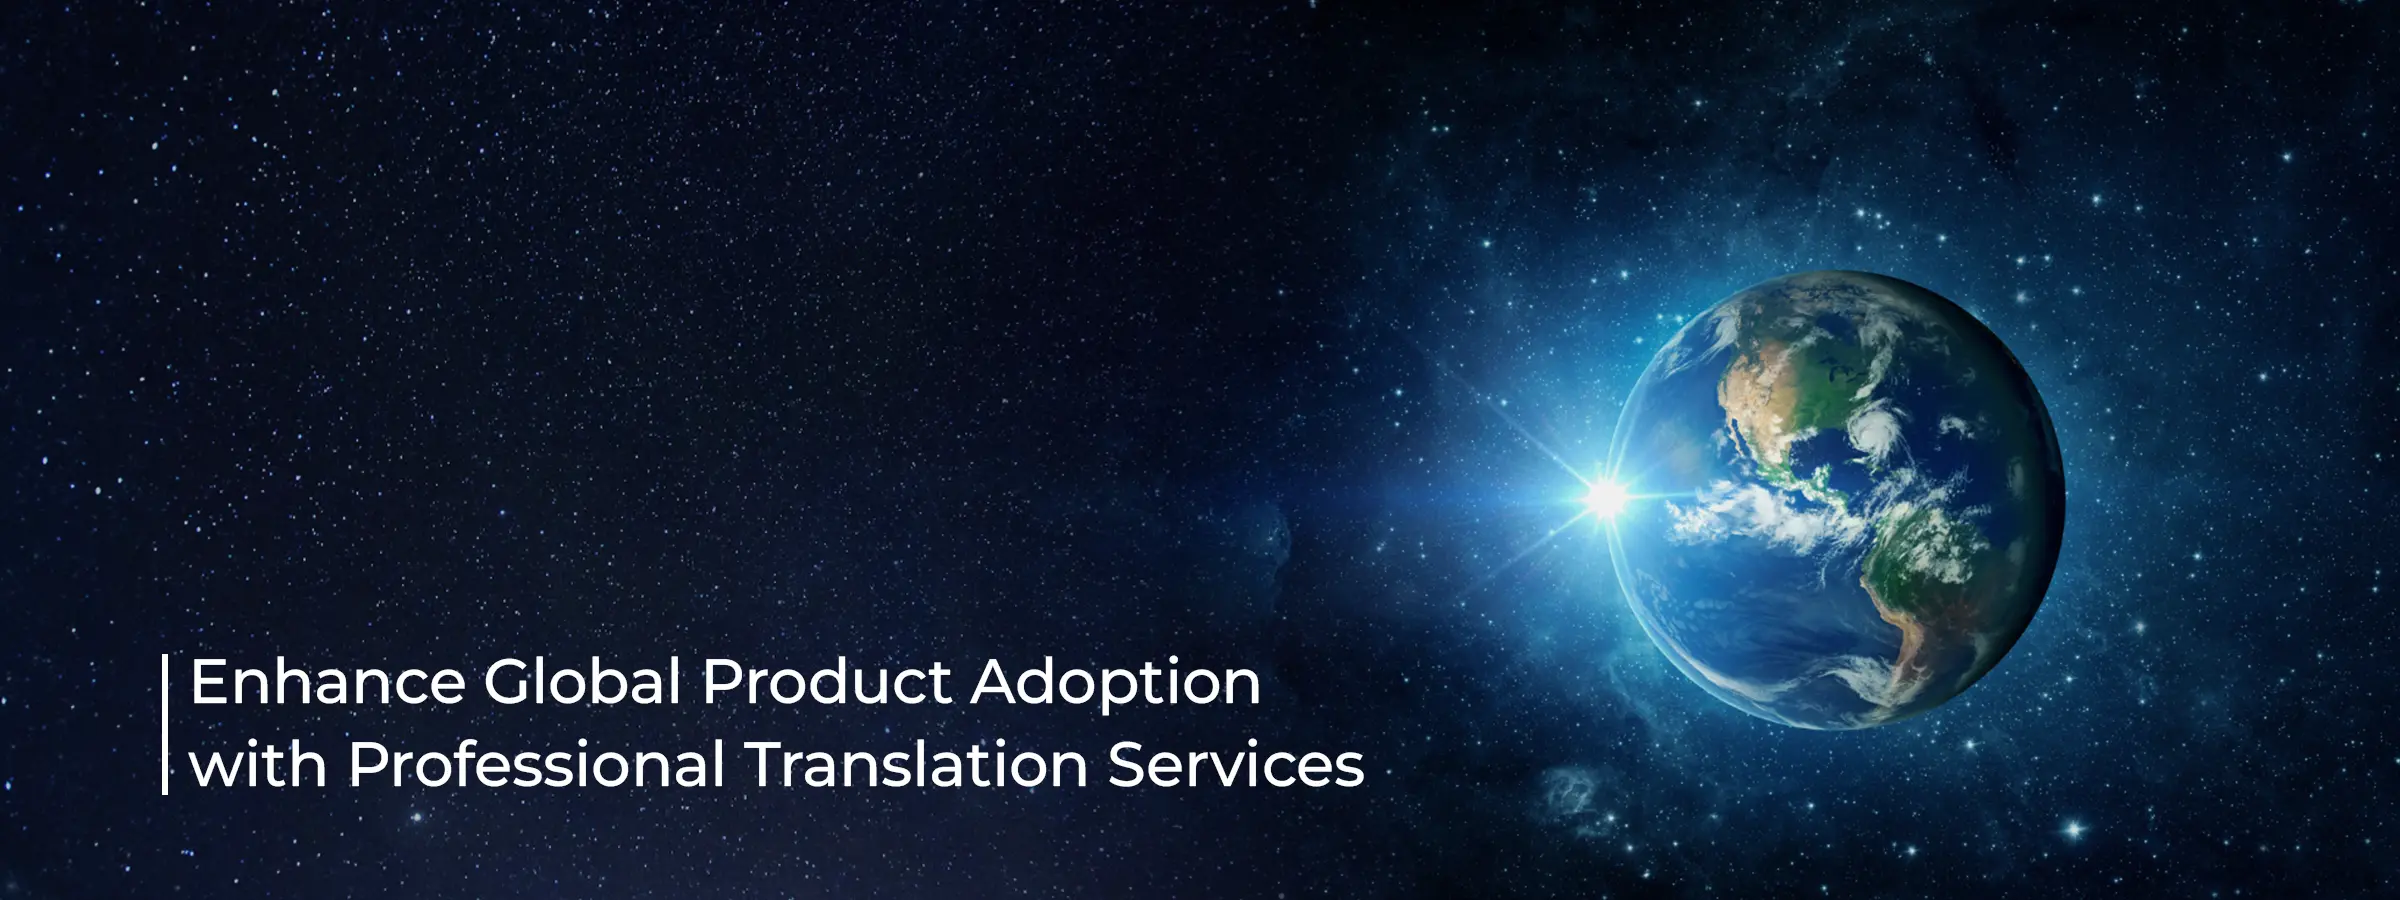 enhance-global-product-adoption-with-professional-translation-services